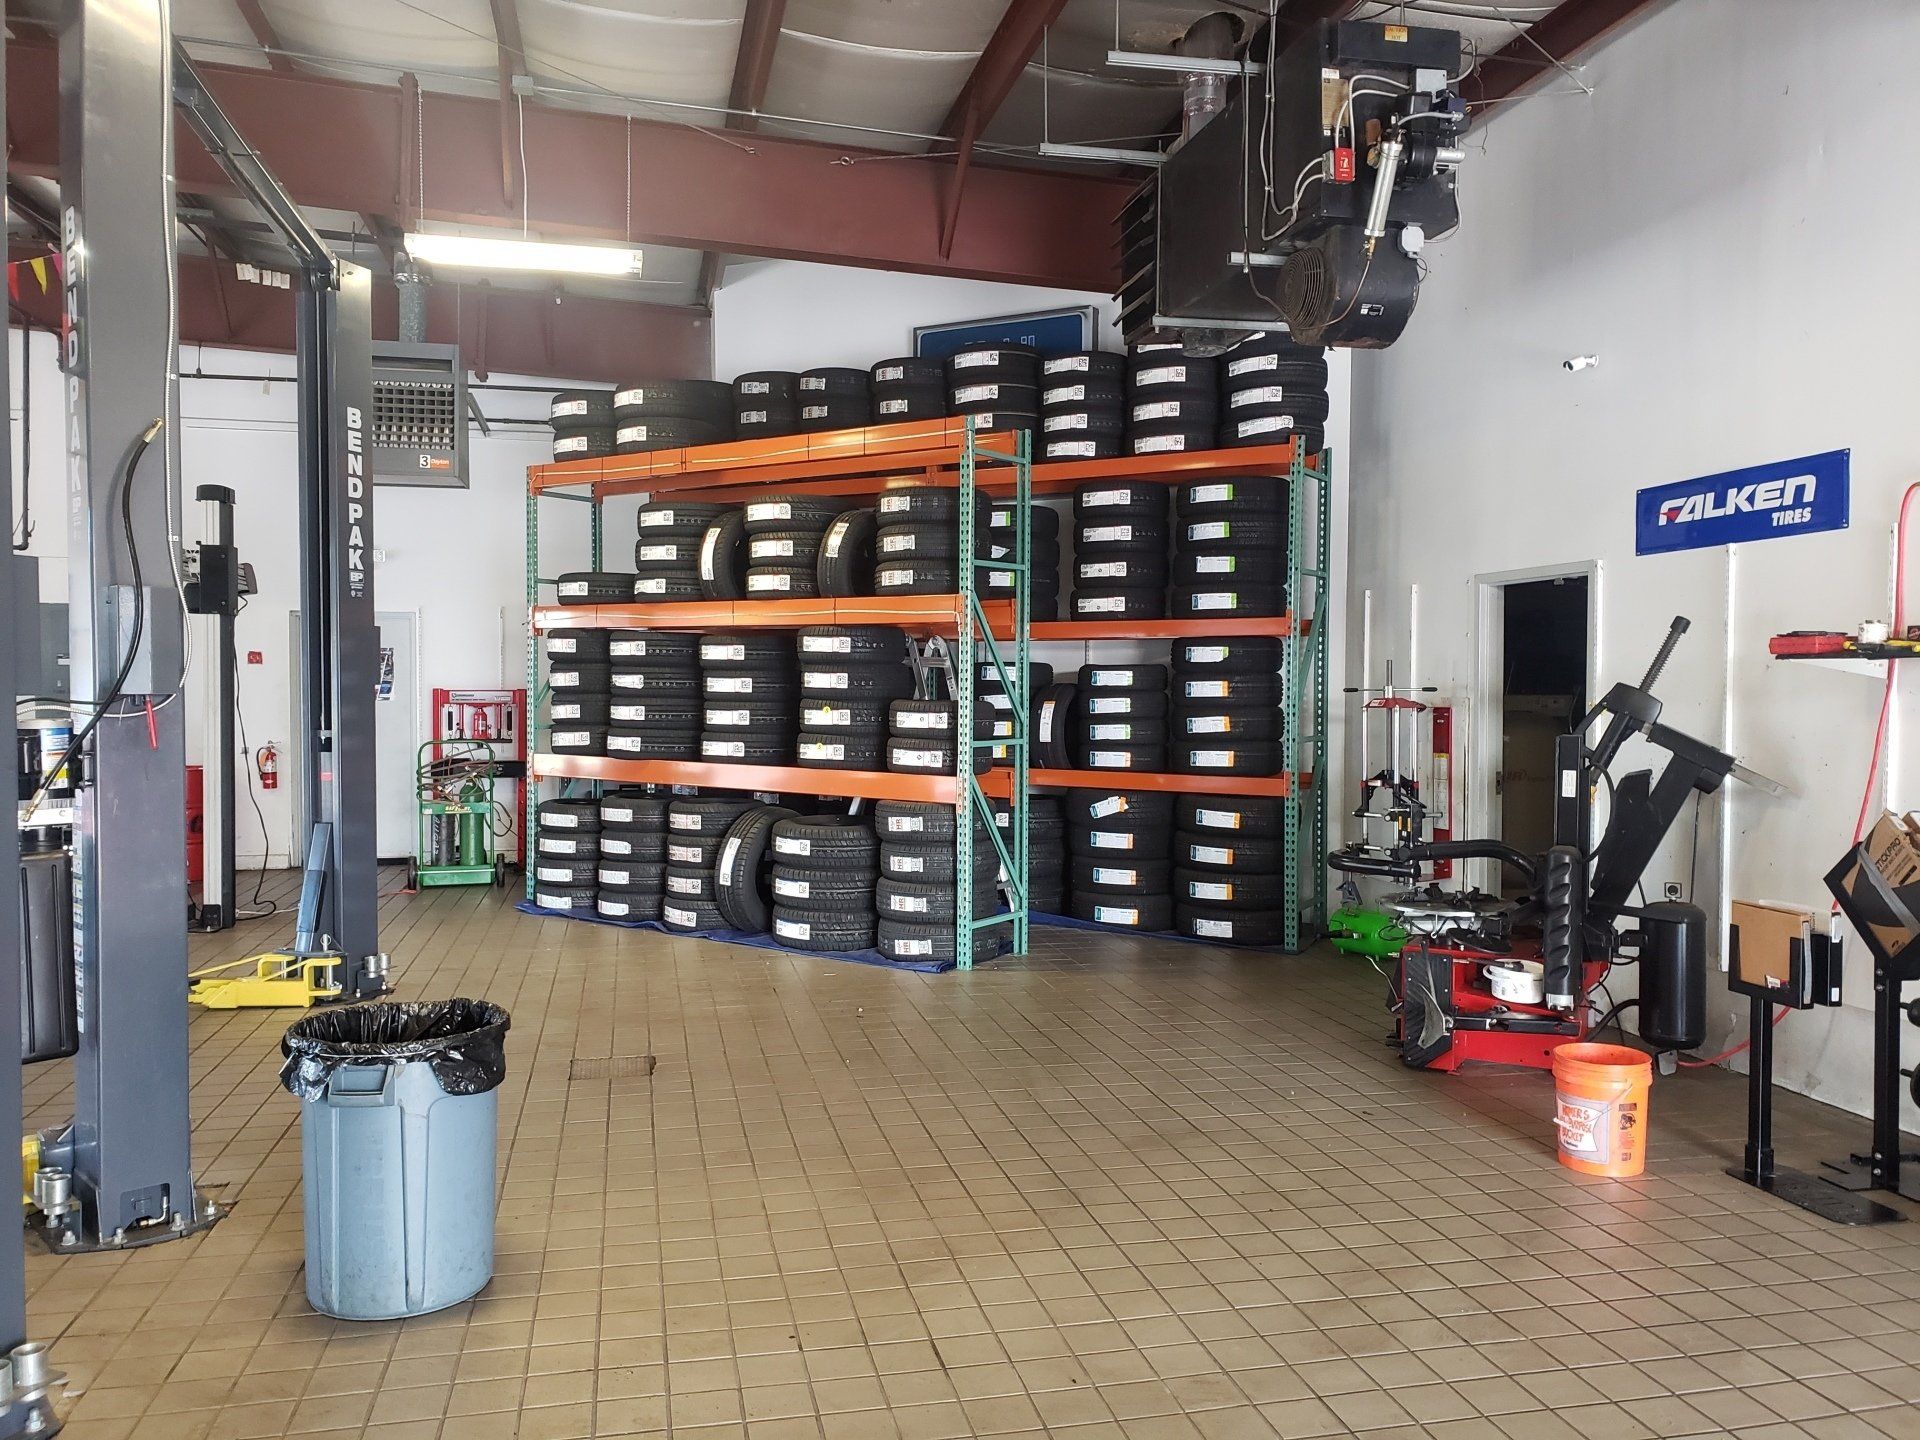 New tires service - Vails Gate Tire & Auto - 898 Blooming Grove Tpke New Windsor, NY 12553